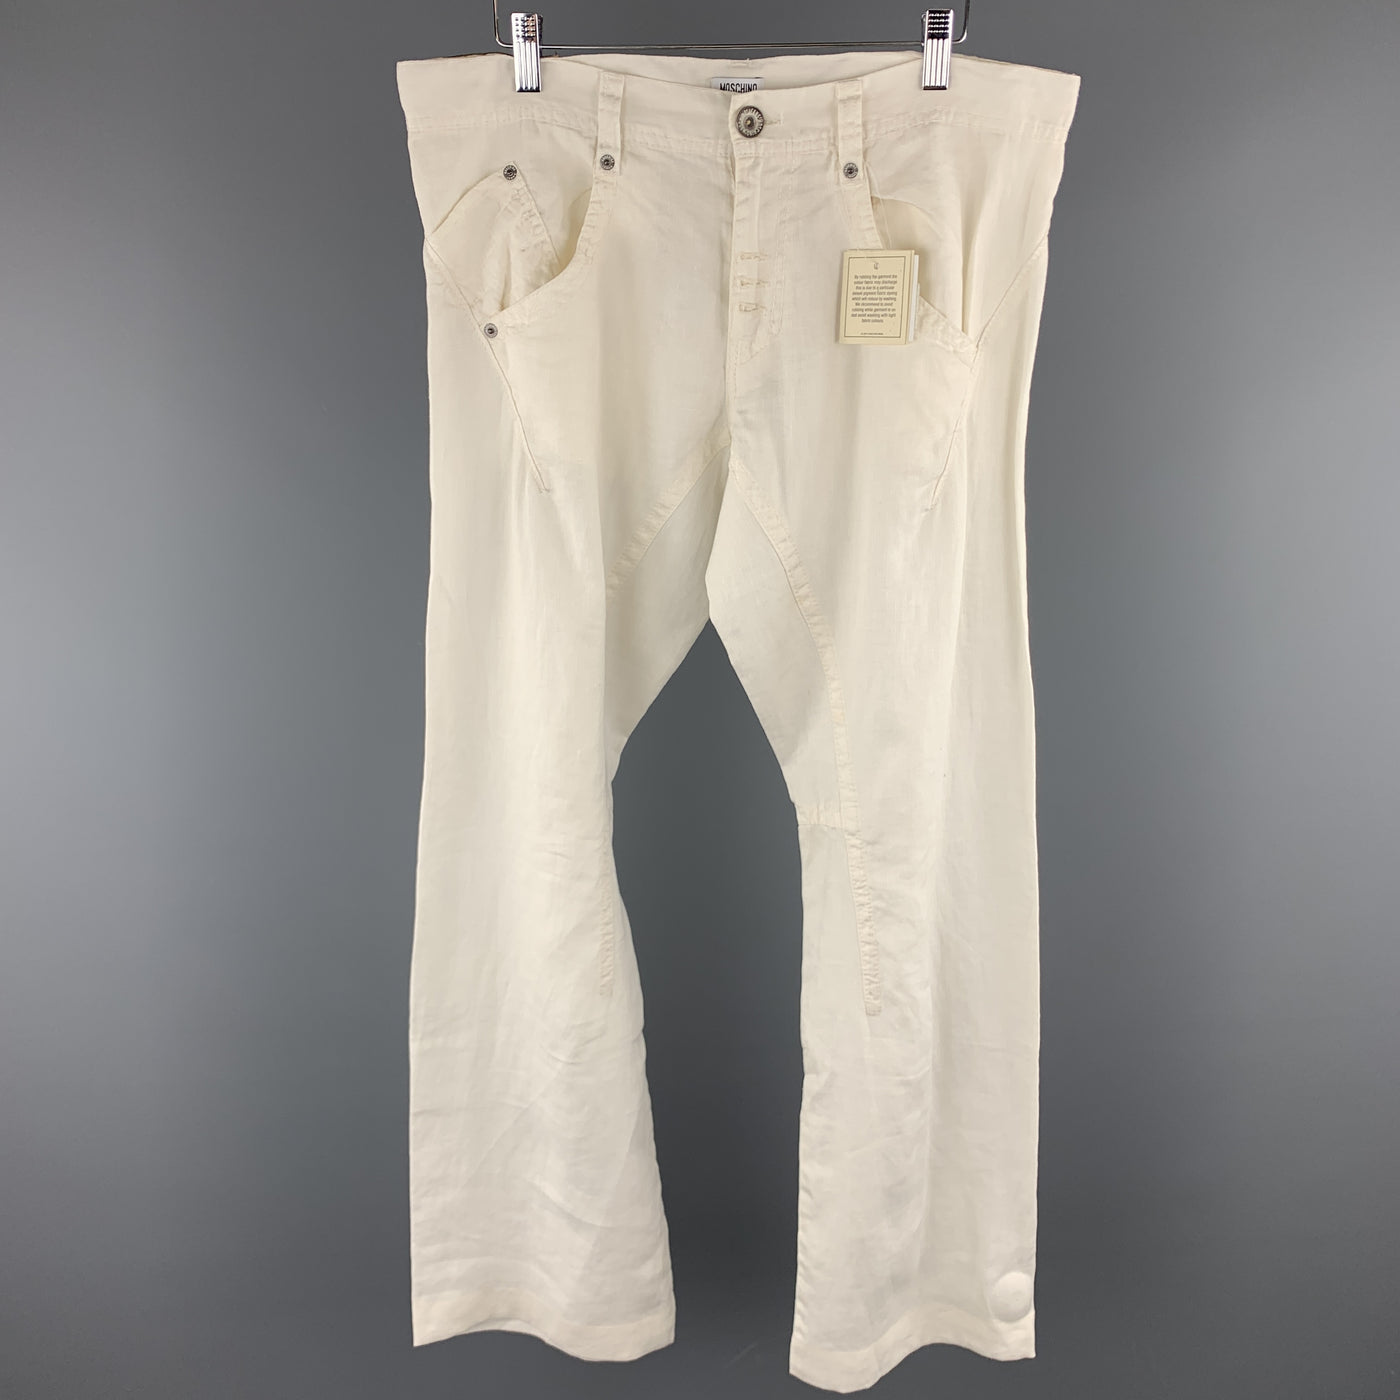 MOSCHINO JEANS Size 32 x 31 White Solid Linen Casual Pants